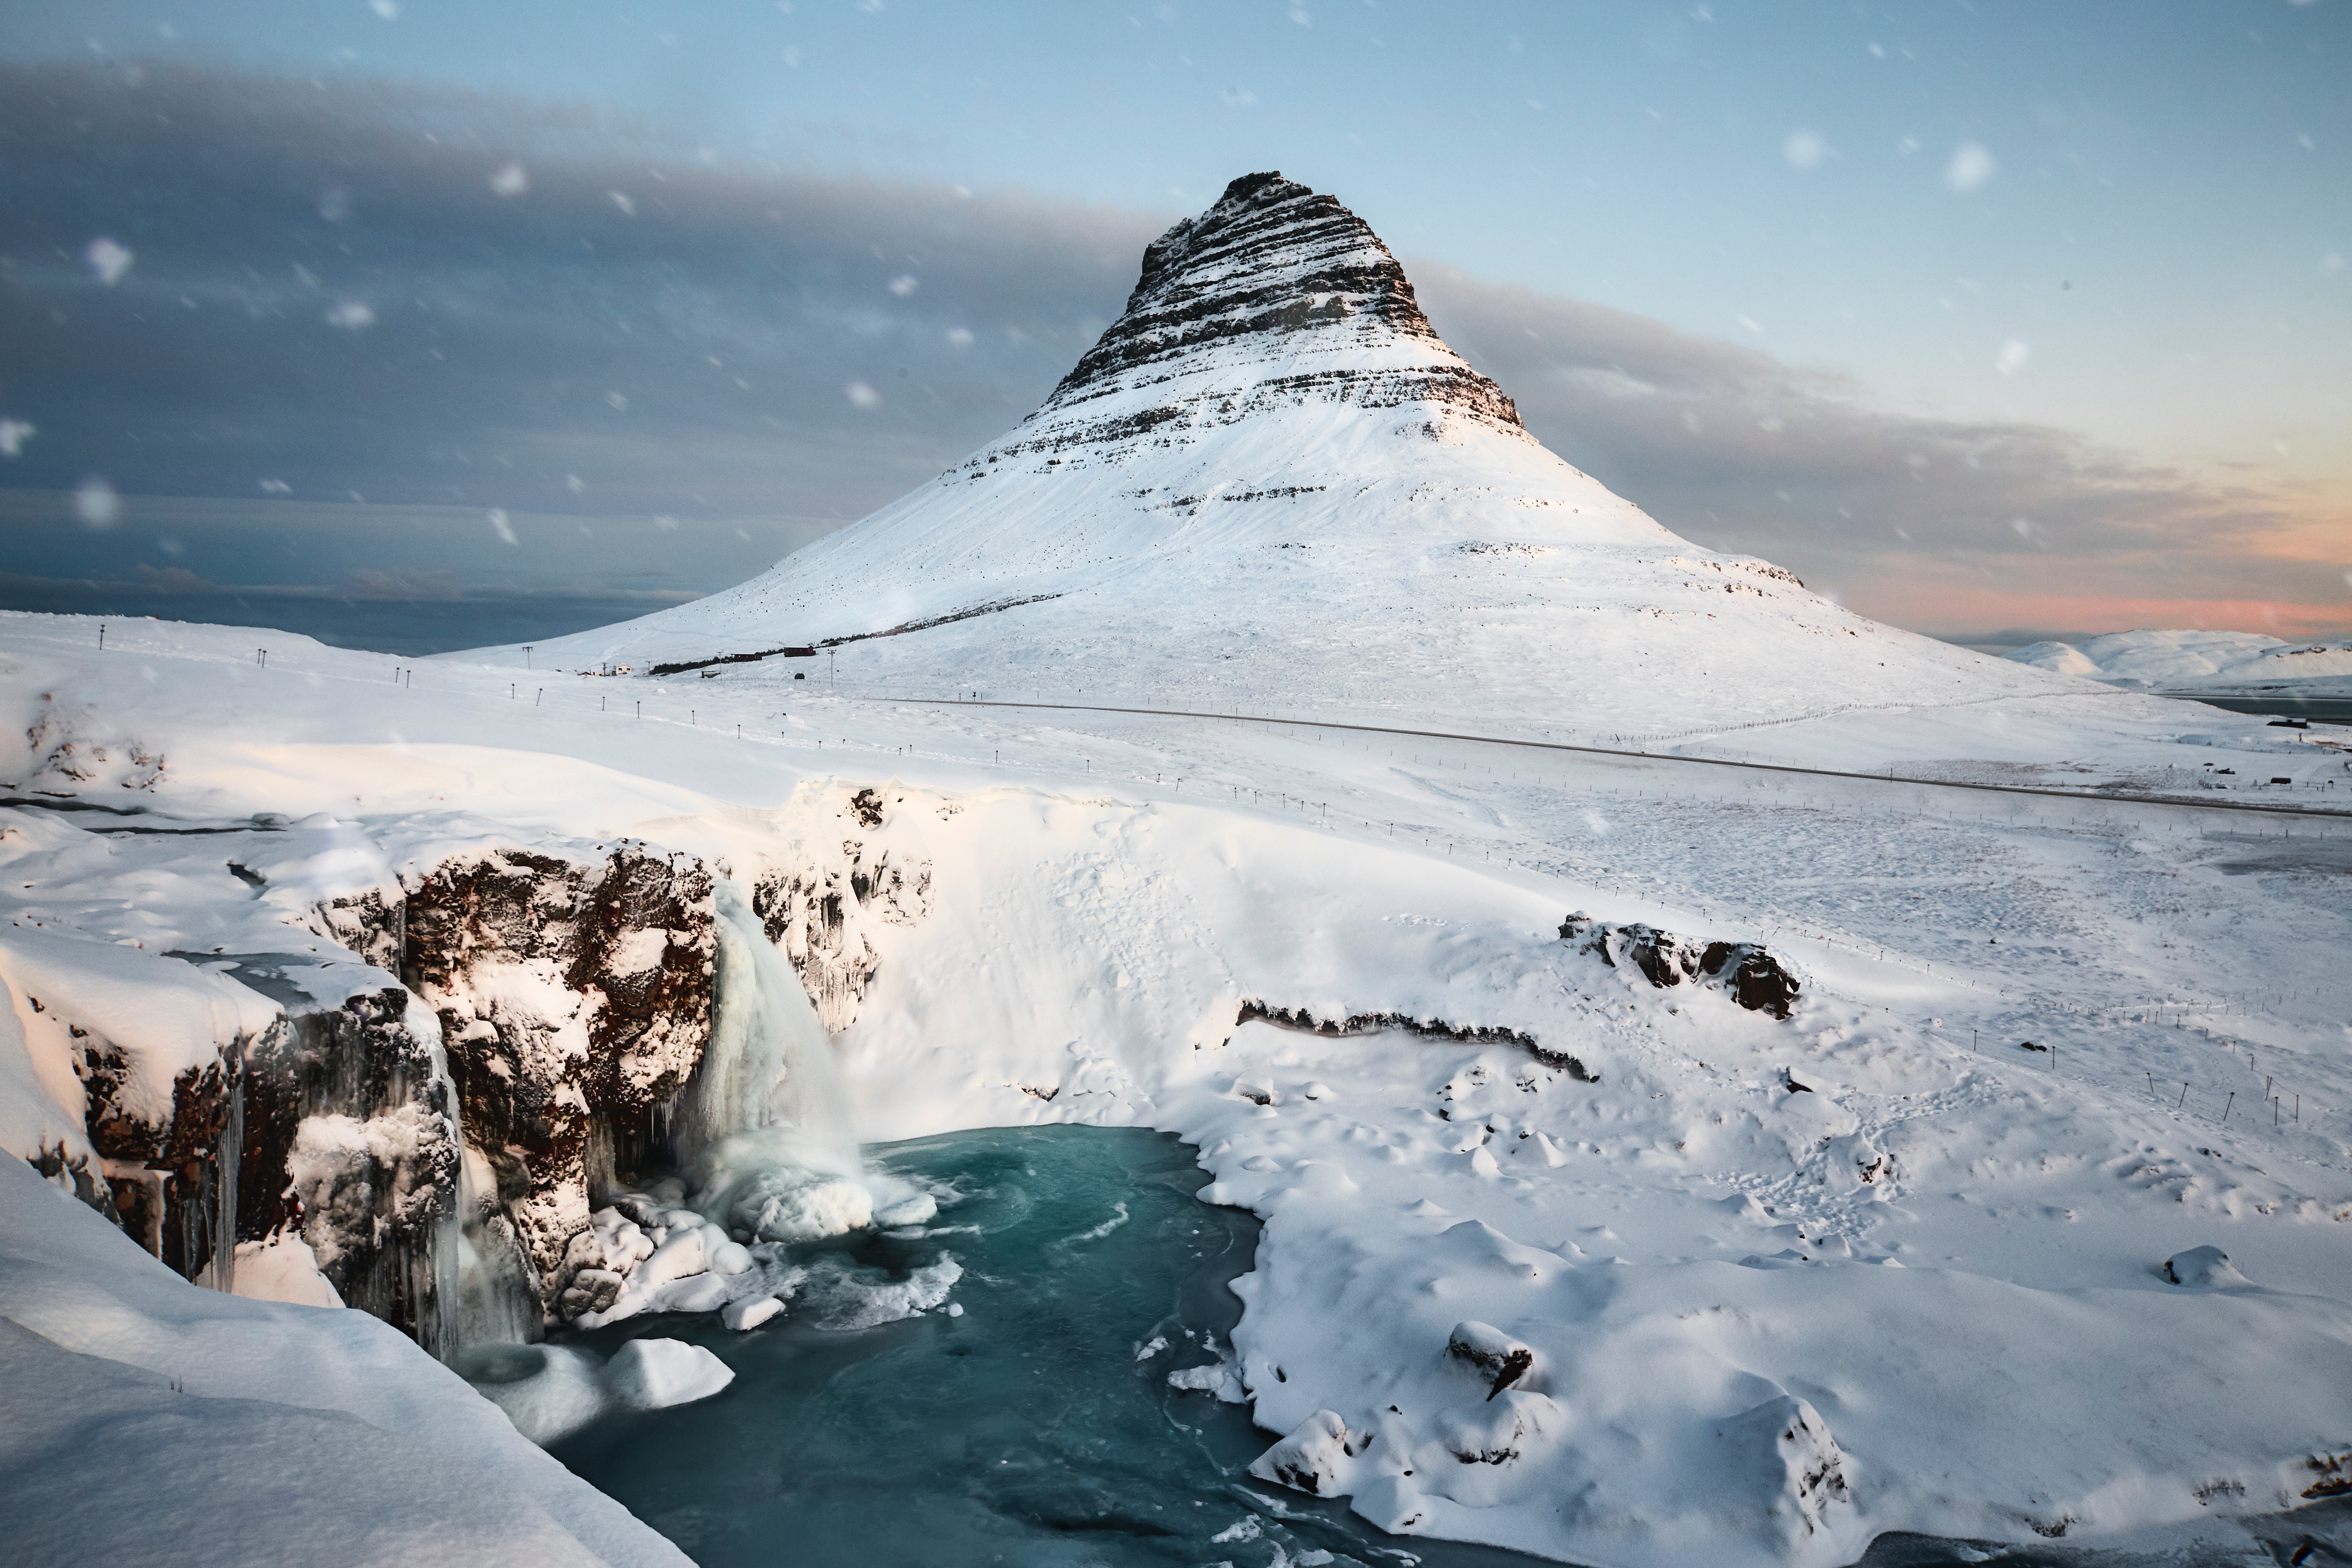 General 5472x3648 nature landscape winter snow mountains Iceland Kirkjufell snowing icicle waterfall